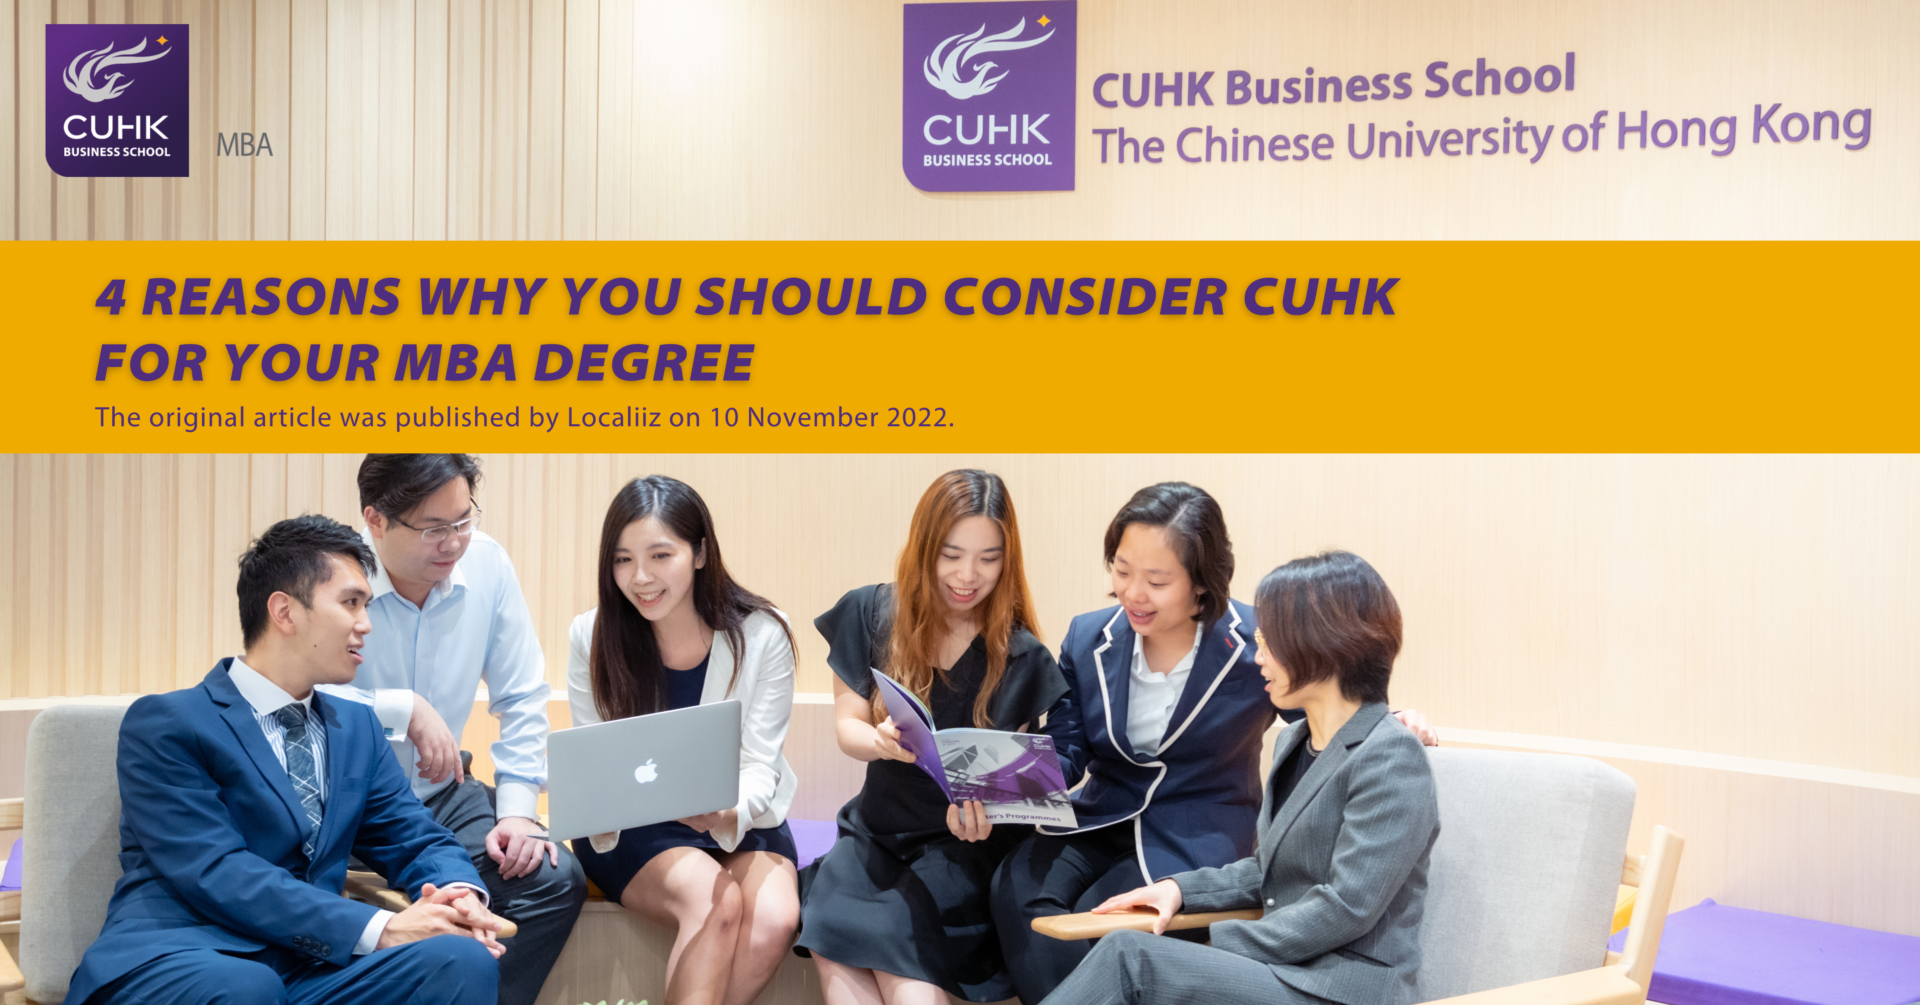 4 reasons why you should consider CUHK for your MBA degree